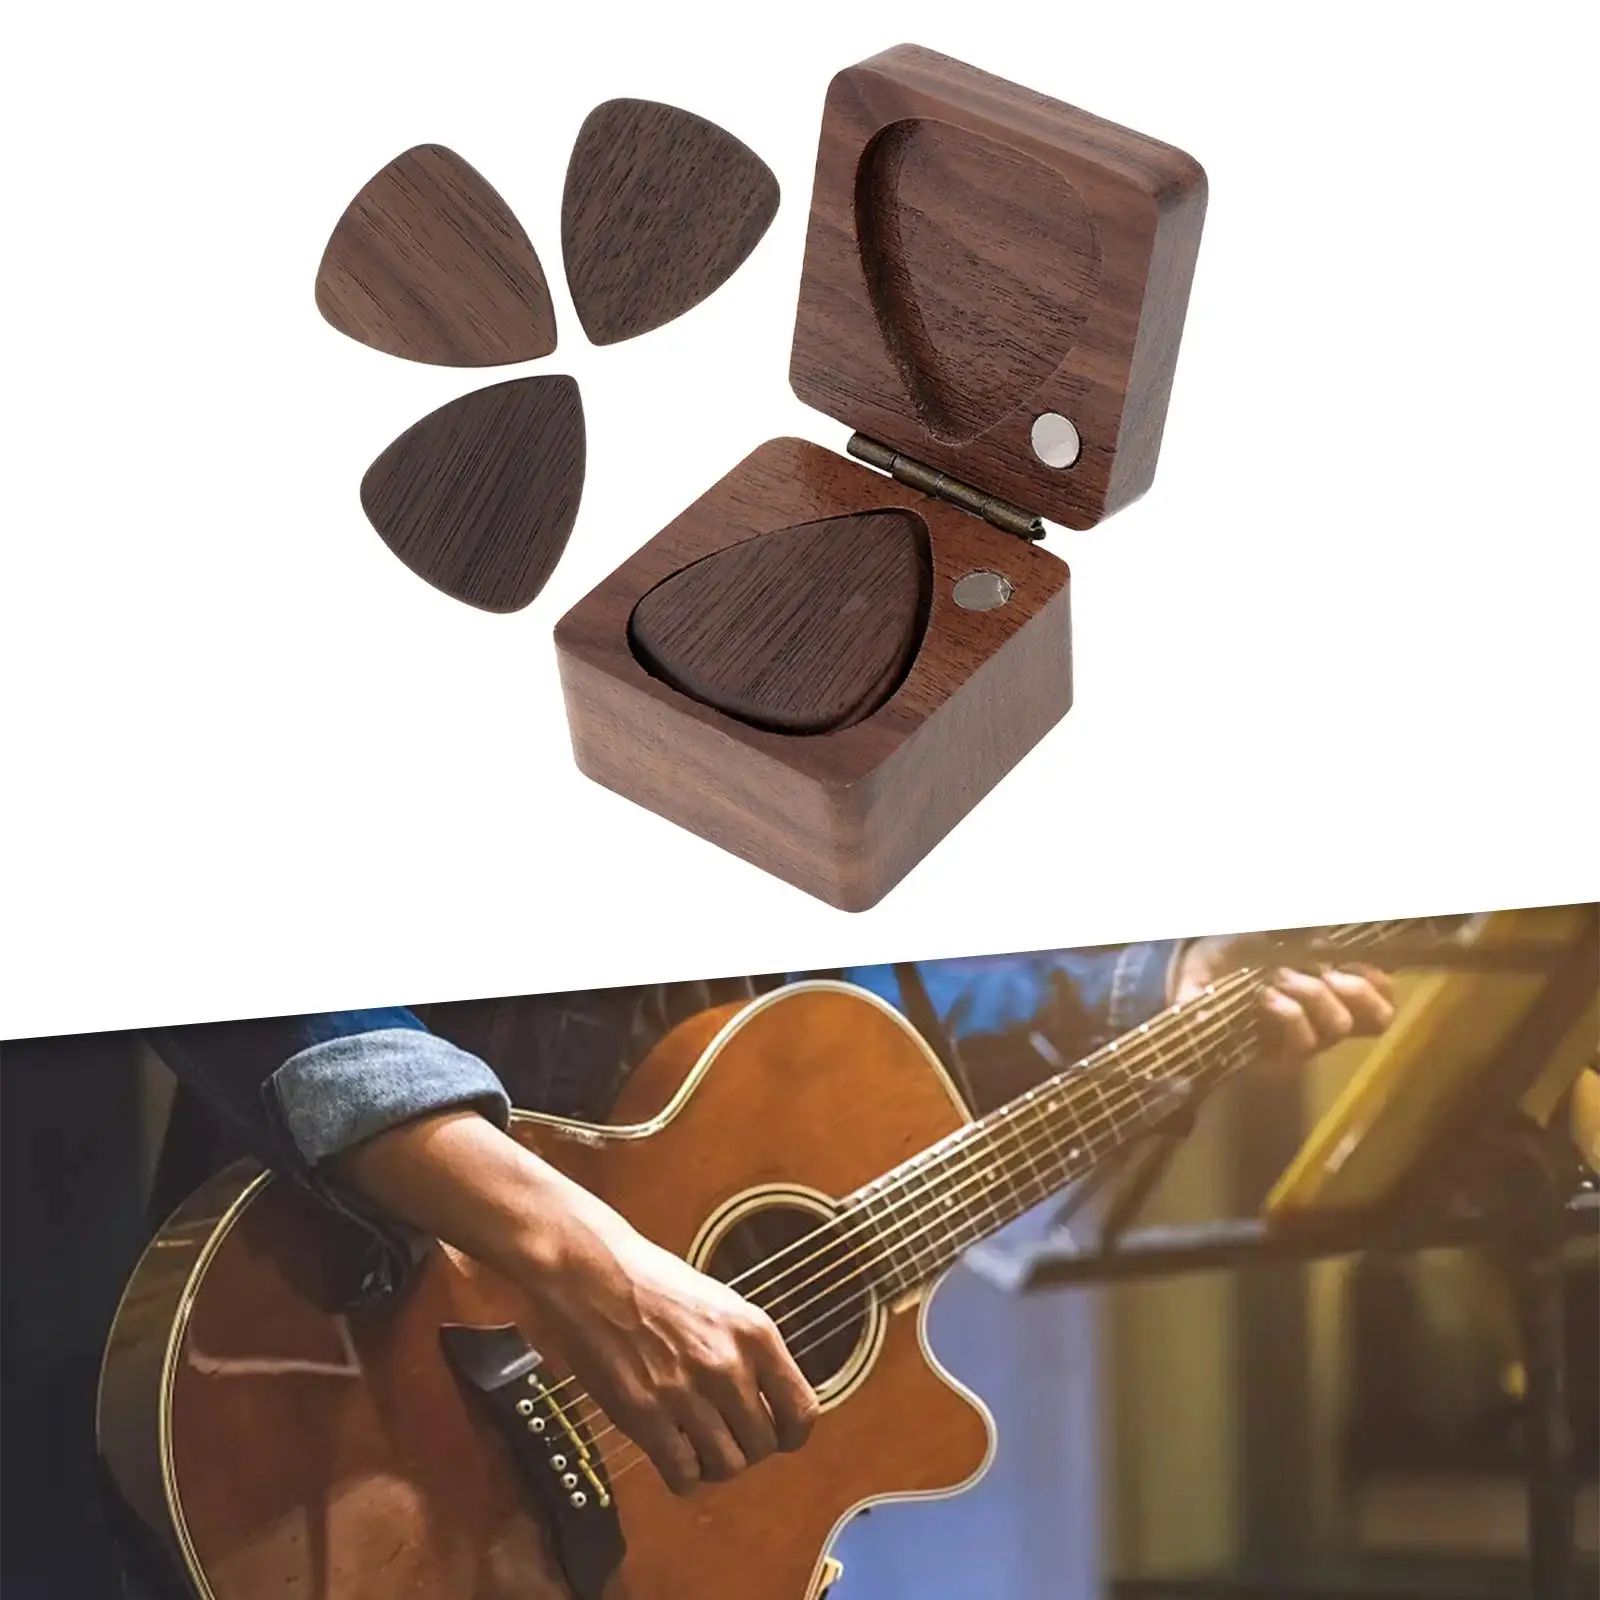 Wooden Guitar Picks Case Protection Sturdy with 3 Guitar Picks Handmade Christmas Gifts Mini Jewelry Box Guitar Pick Box Holder